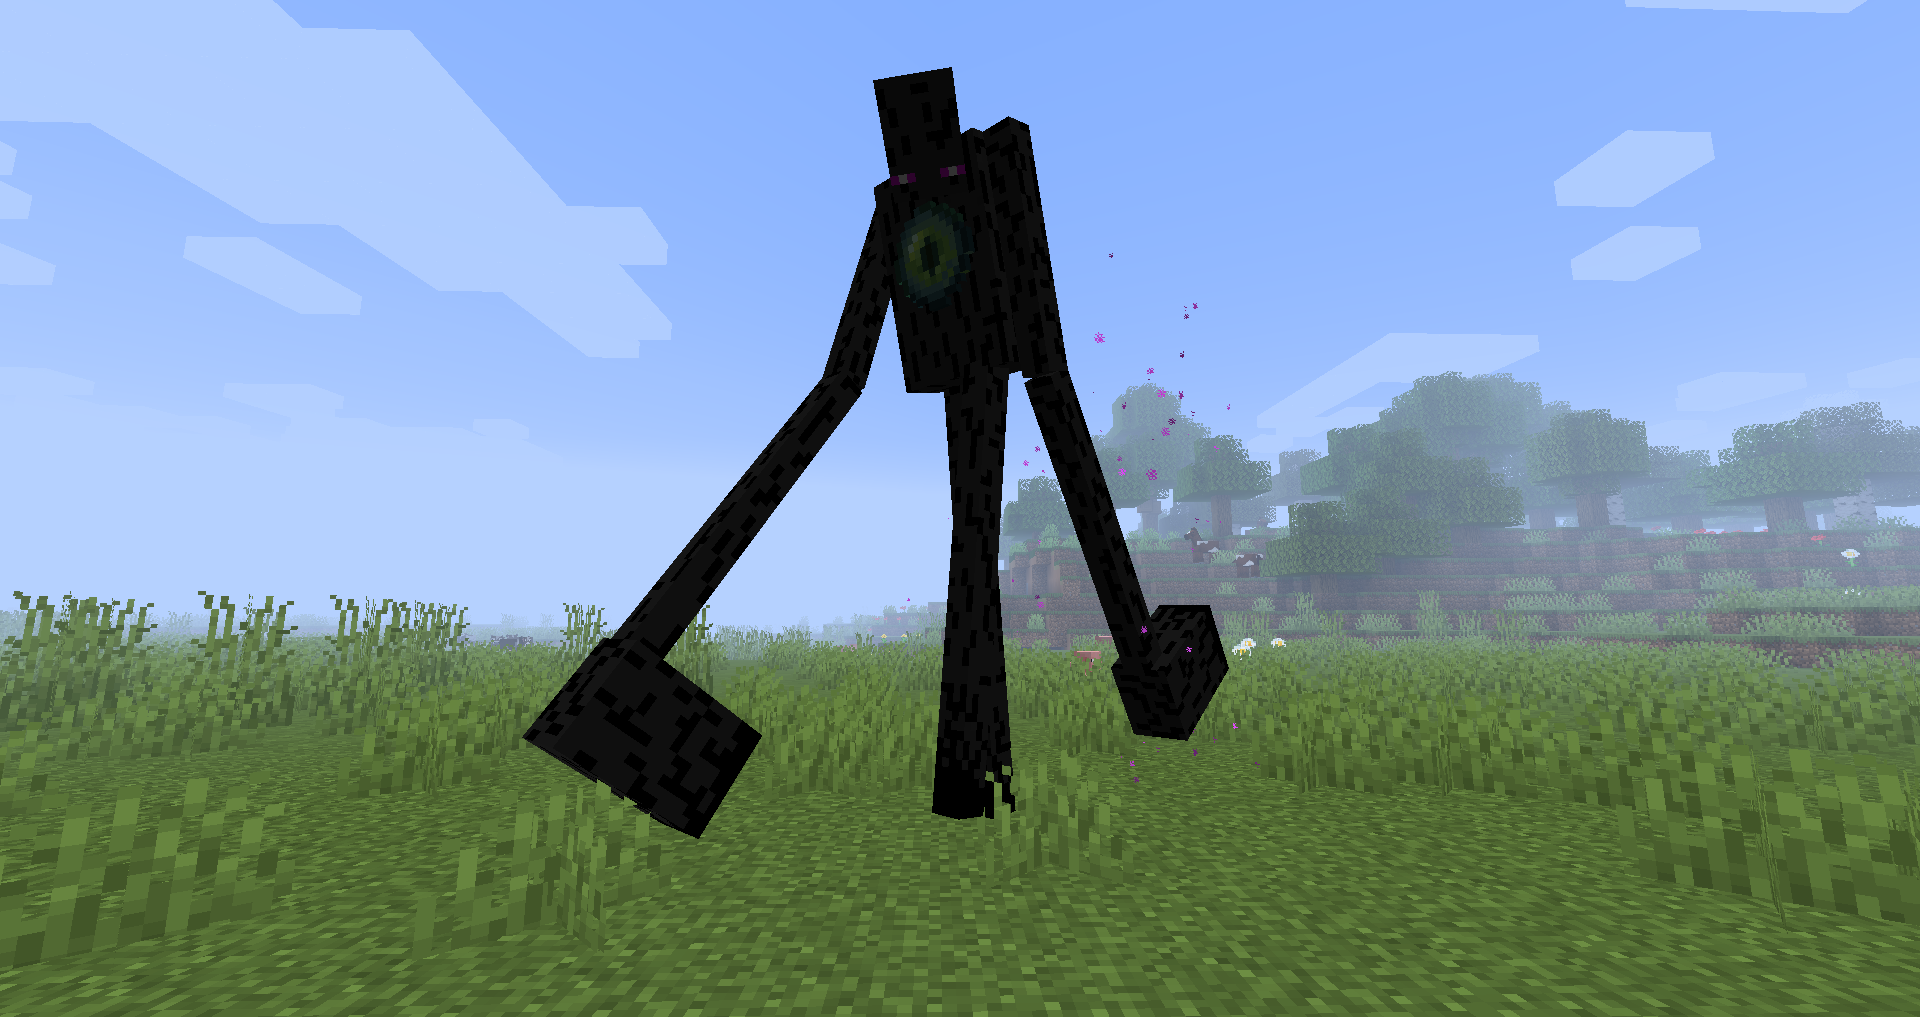 I'm trying to make this Enderman farm in my 1.16.5 world. Could